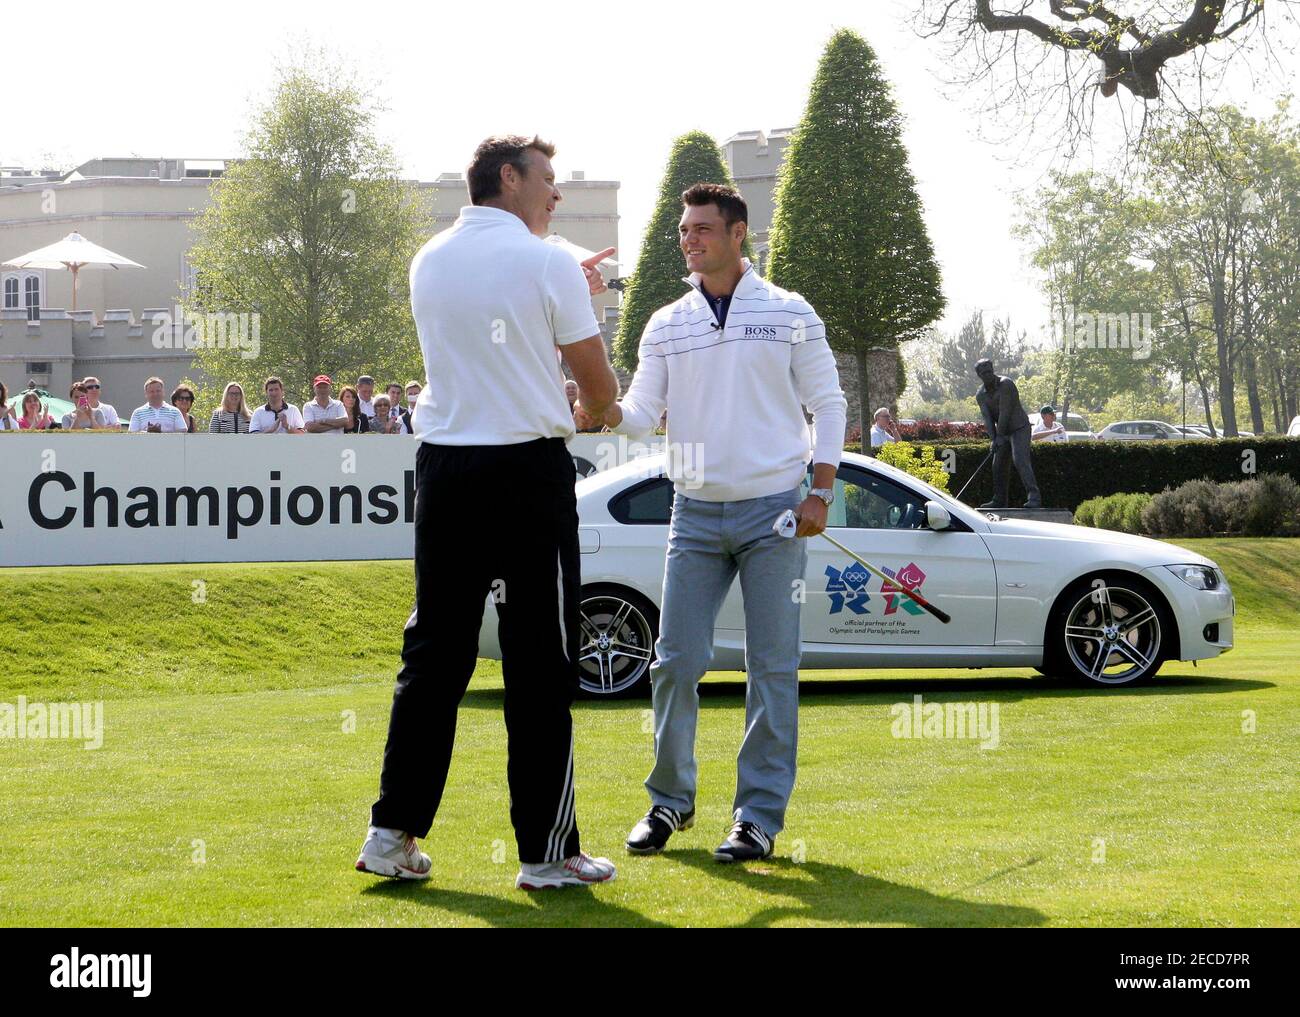 Golf - BMW PGA Championship Media Day - Wentworth - 20/4/11  World Number One golfer Germany's Martin Kaymer (R) and three time Olympic medalist and BMW London 2012 Performance Team member Steve Backley OBE go head to head in a multi-sport play-off from Wentworth Club's first tee today, ahead of the BMW PGA Championship on 26th-29th May 2011  Mandatory Credit: Action Images / Andrew Boyers  Livepic Stock Photo